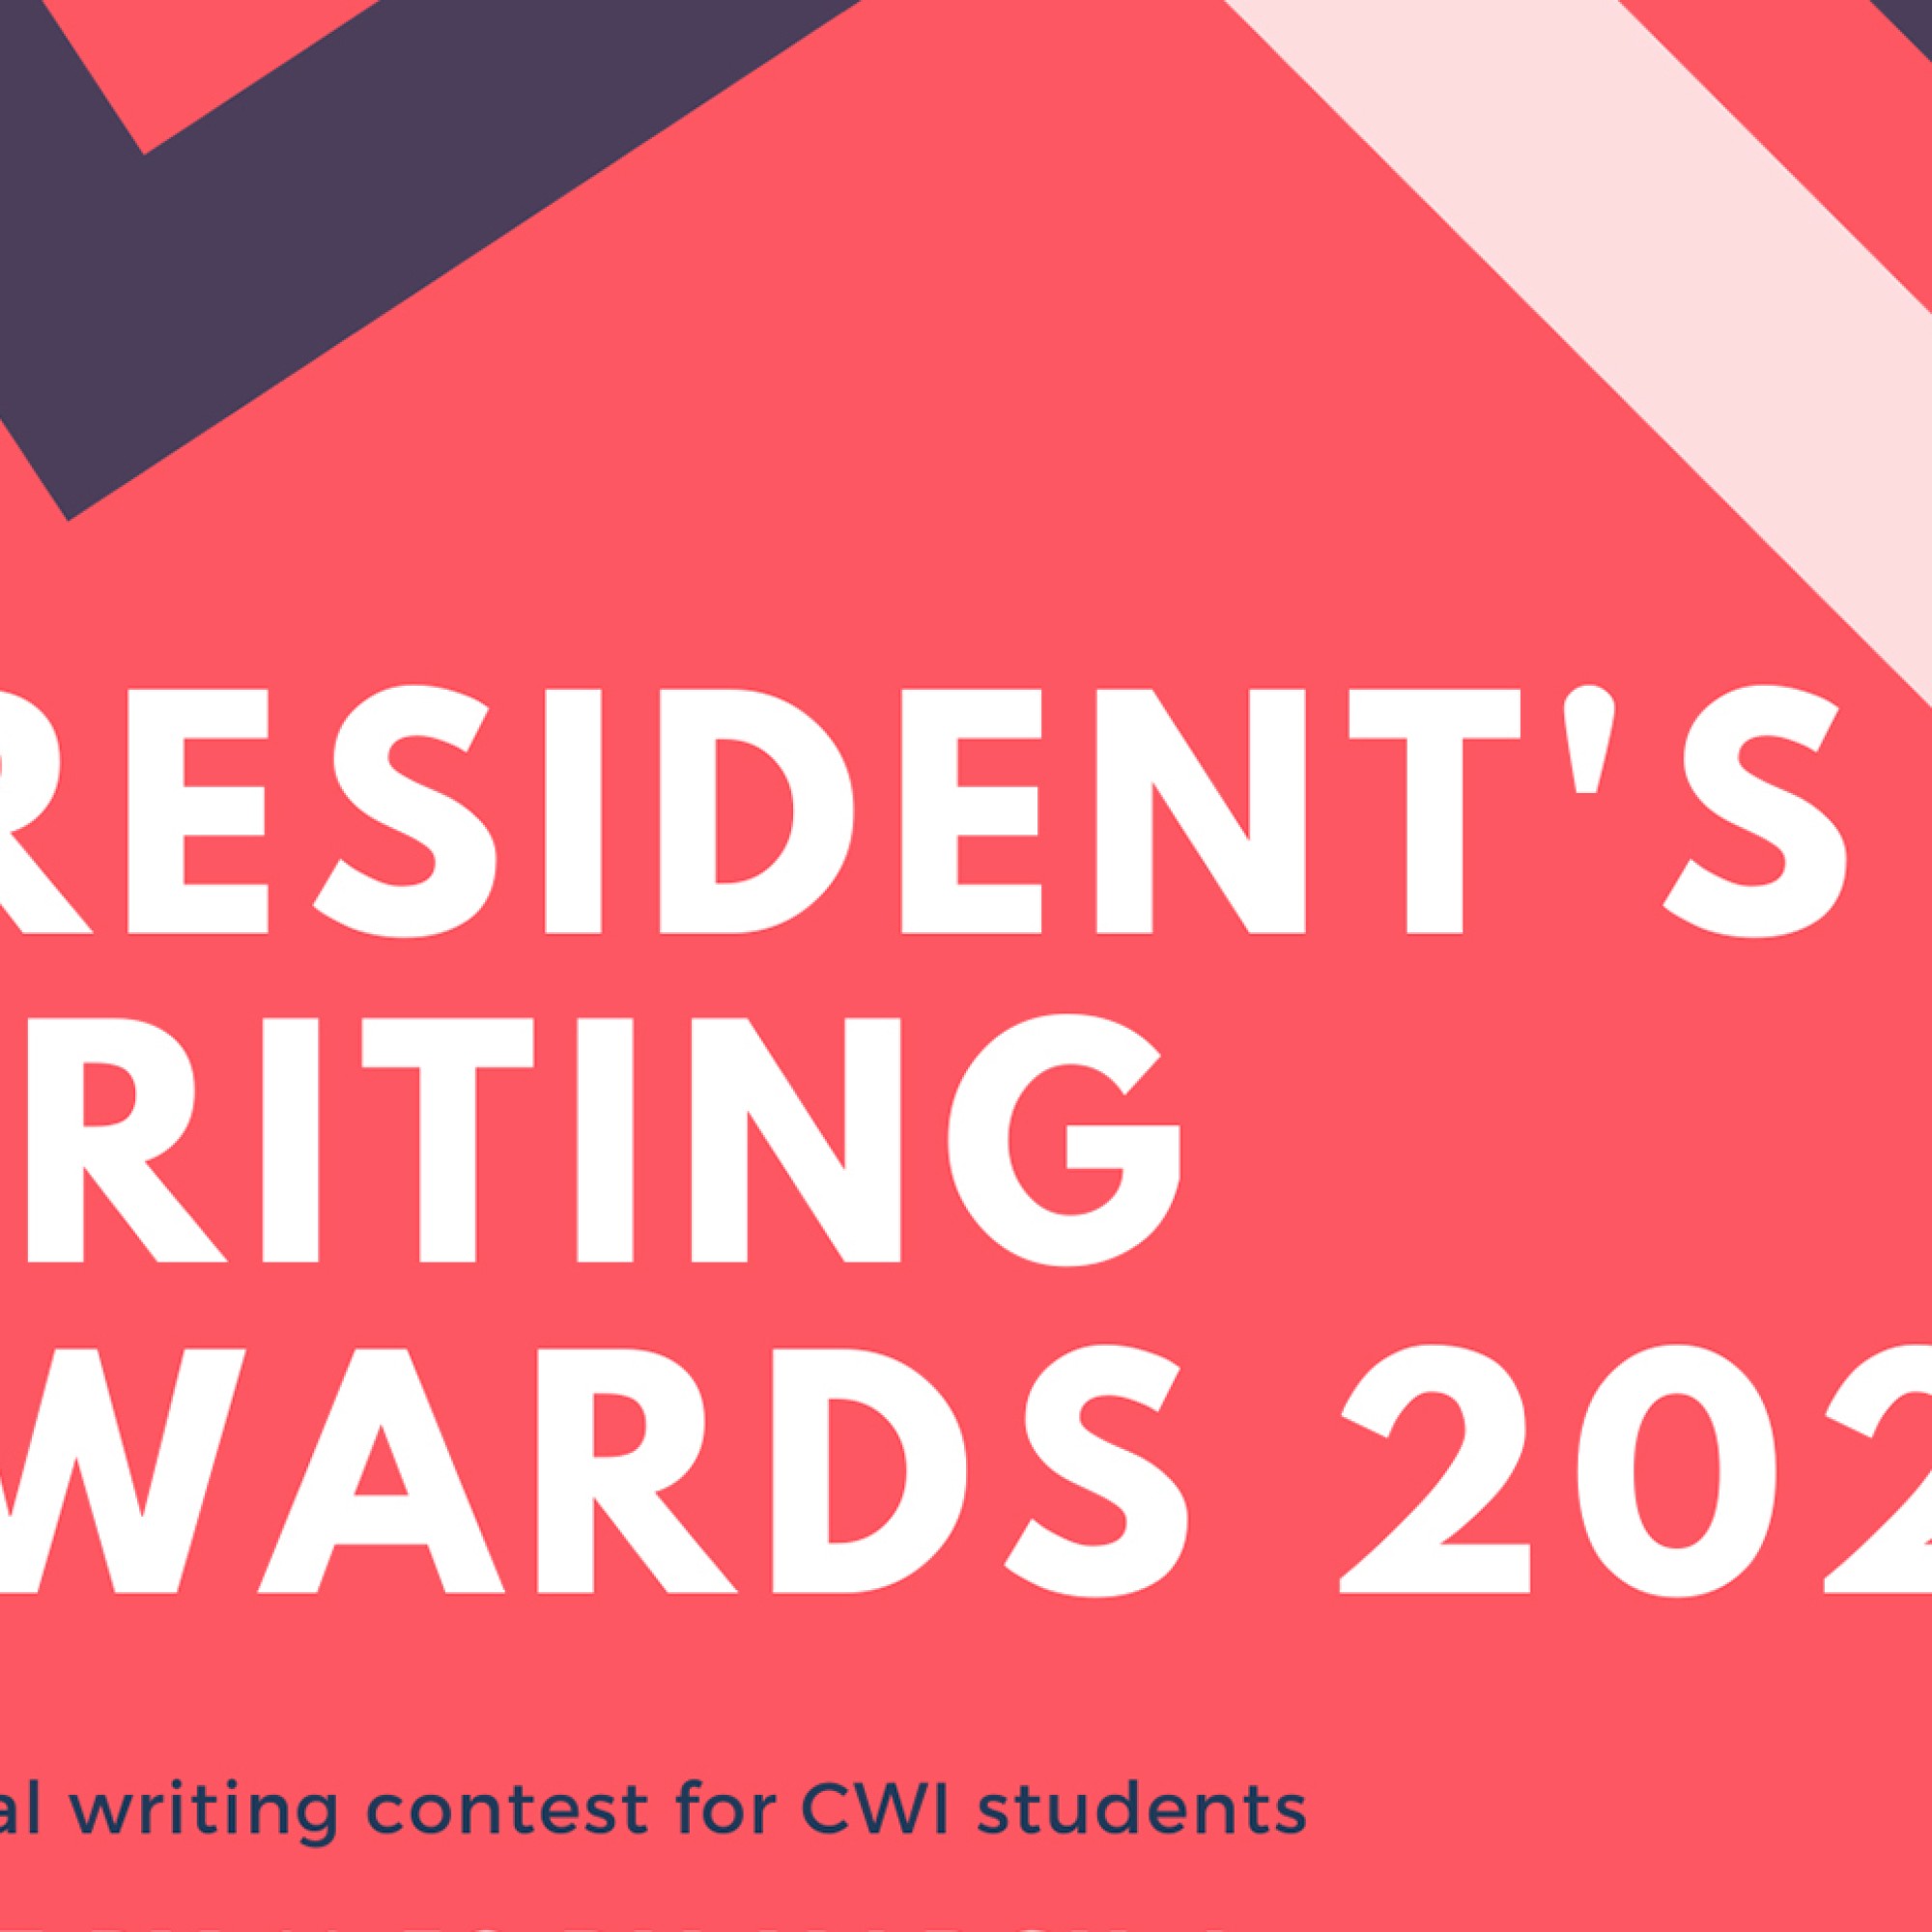 President's Writing Awards 2022 An annual writing contest for CWI students